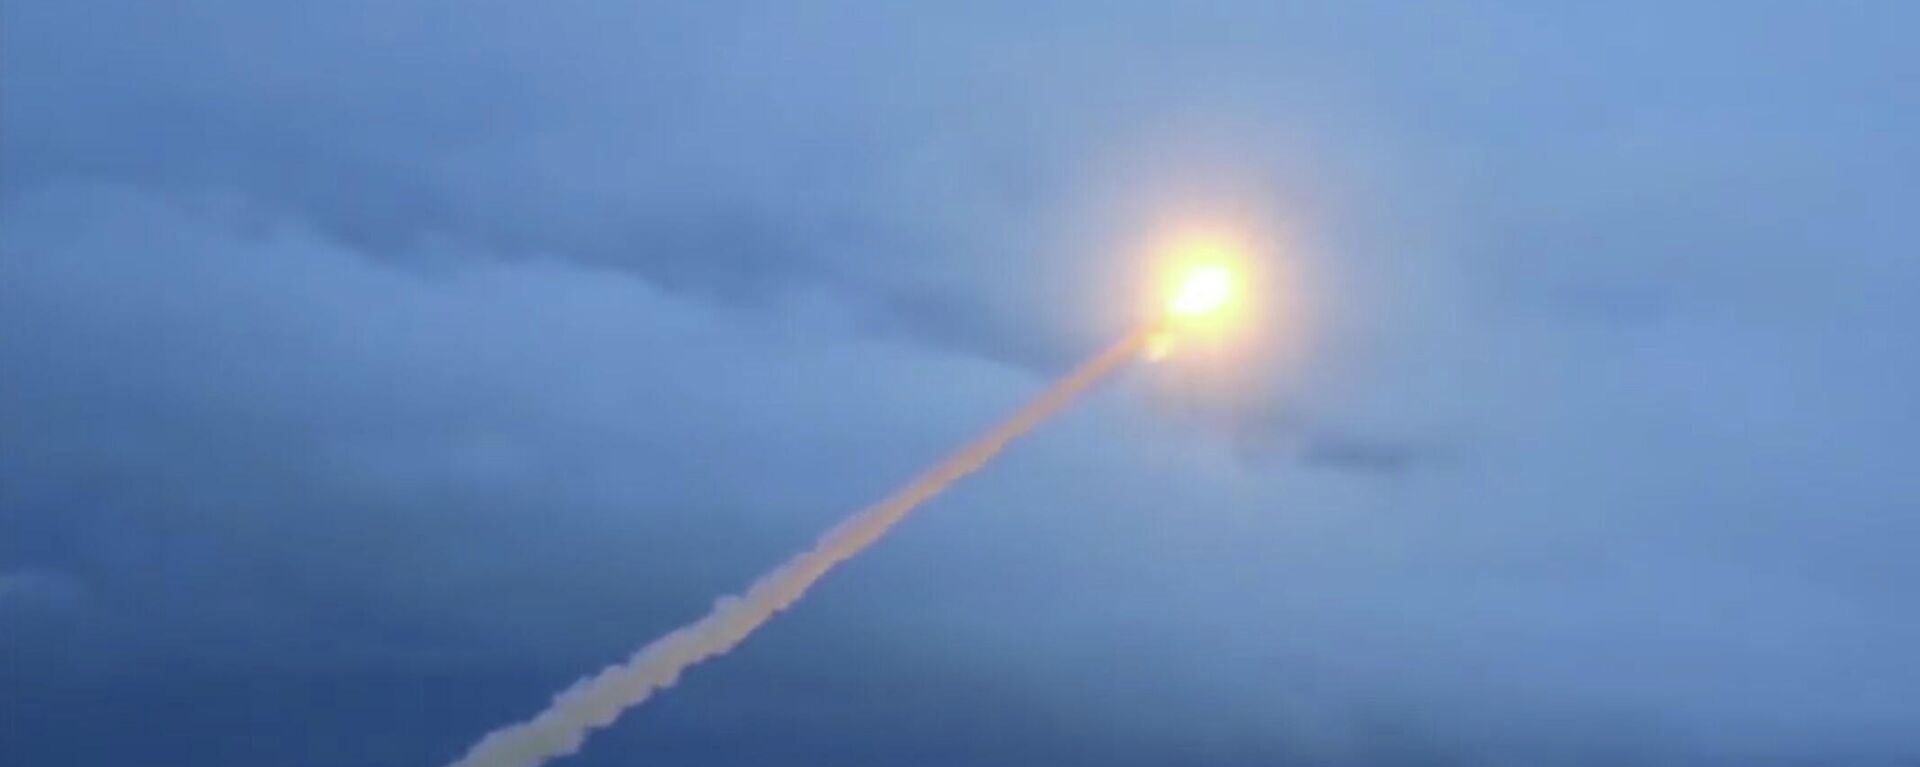 Trial launch of Russian cruise missile with nuclear powered engine  9M730 Burevestnik (NATO reporting name: SSC-X-9 Skyfall) - Sputnik International, 1920, 26.09.2022